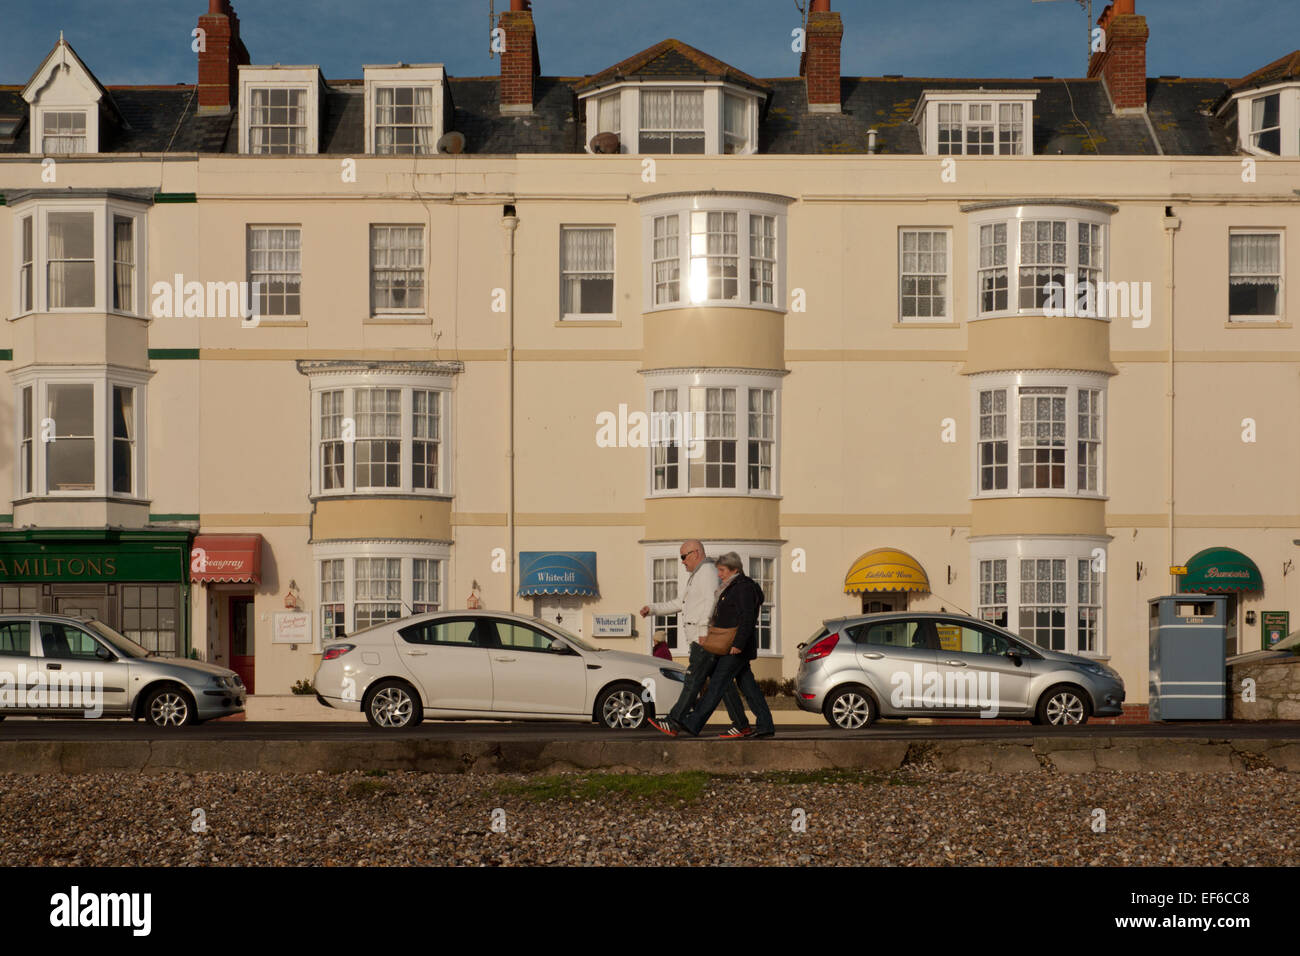 Hotels and bed and breakfasts, Weymouth Esplanade, Dorset UK Stock Photo